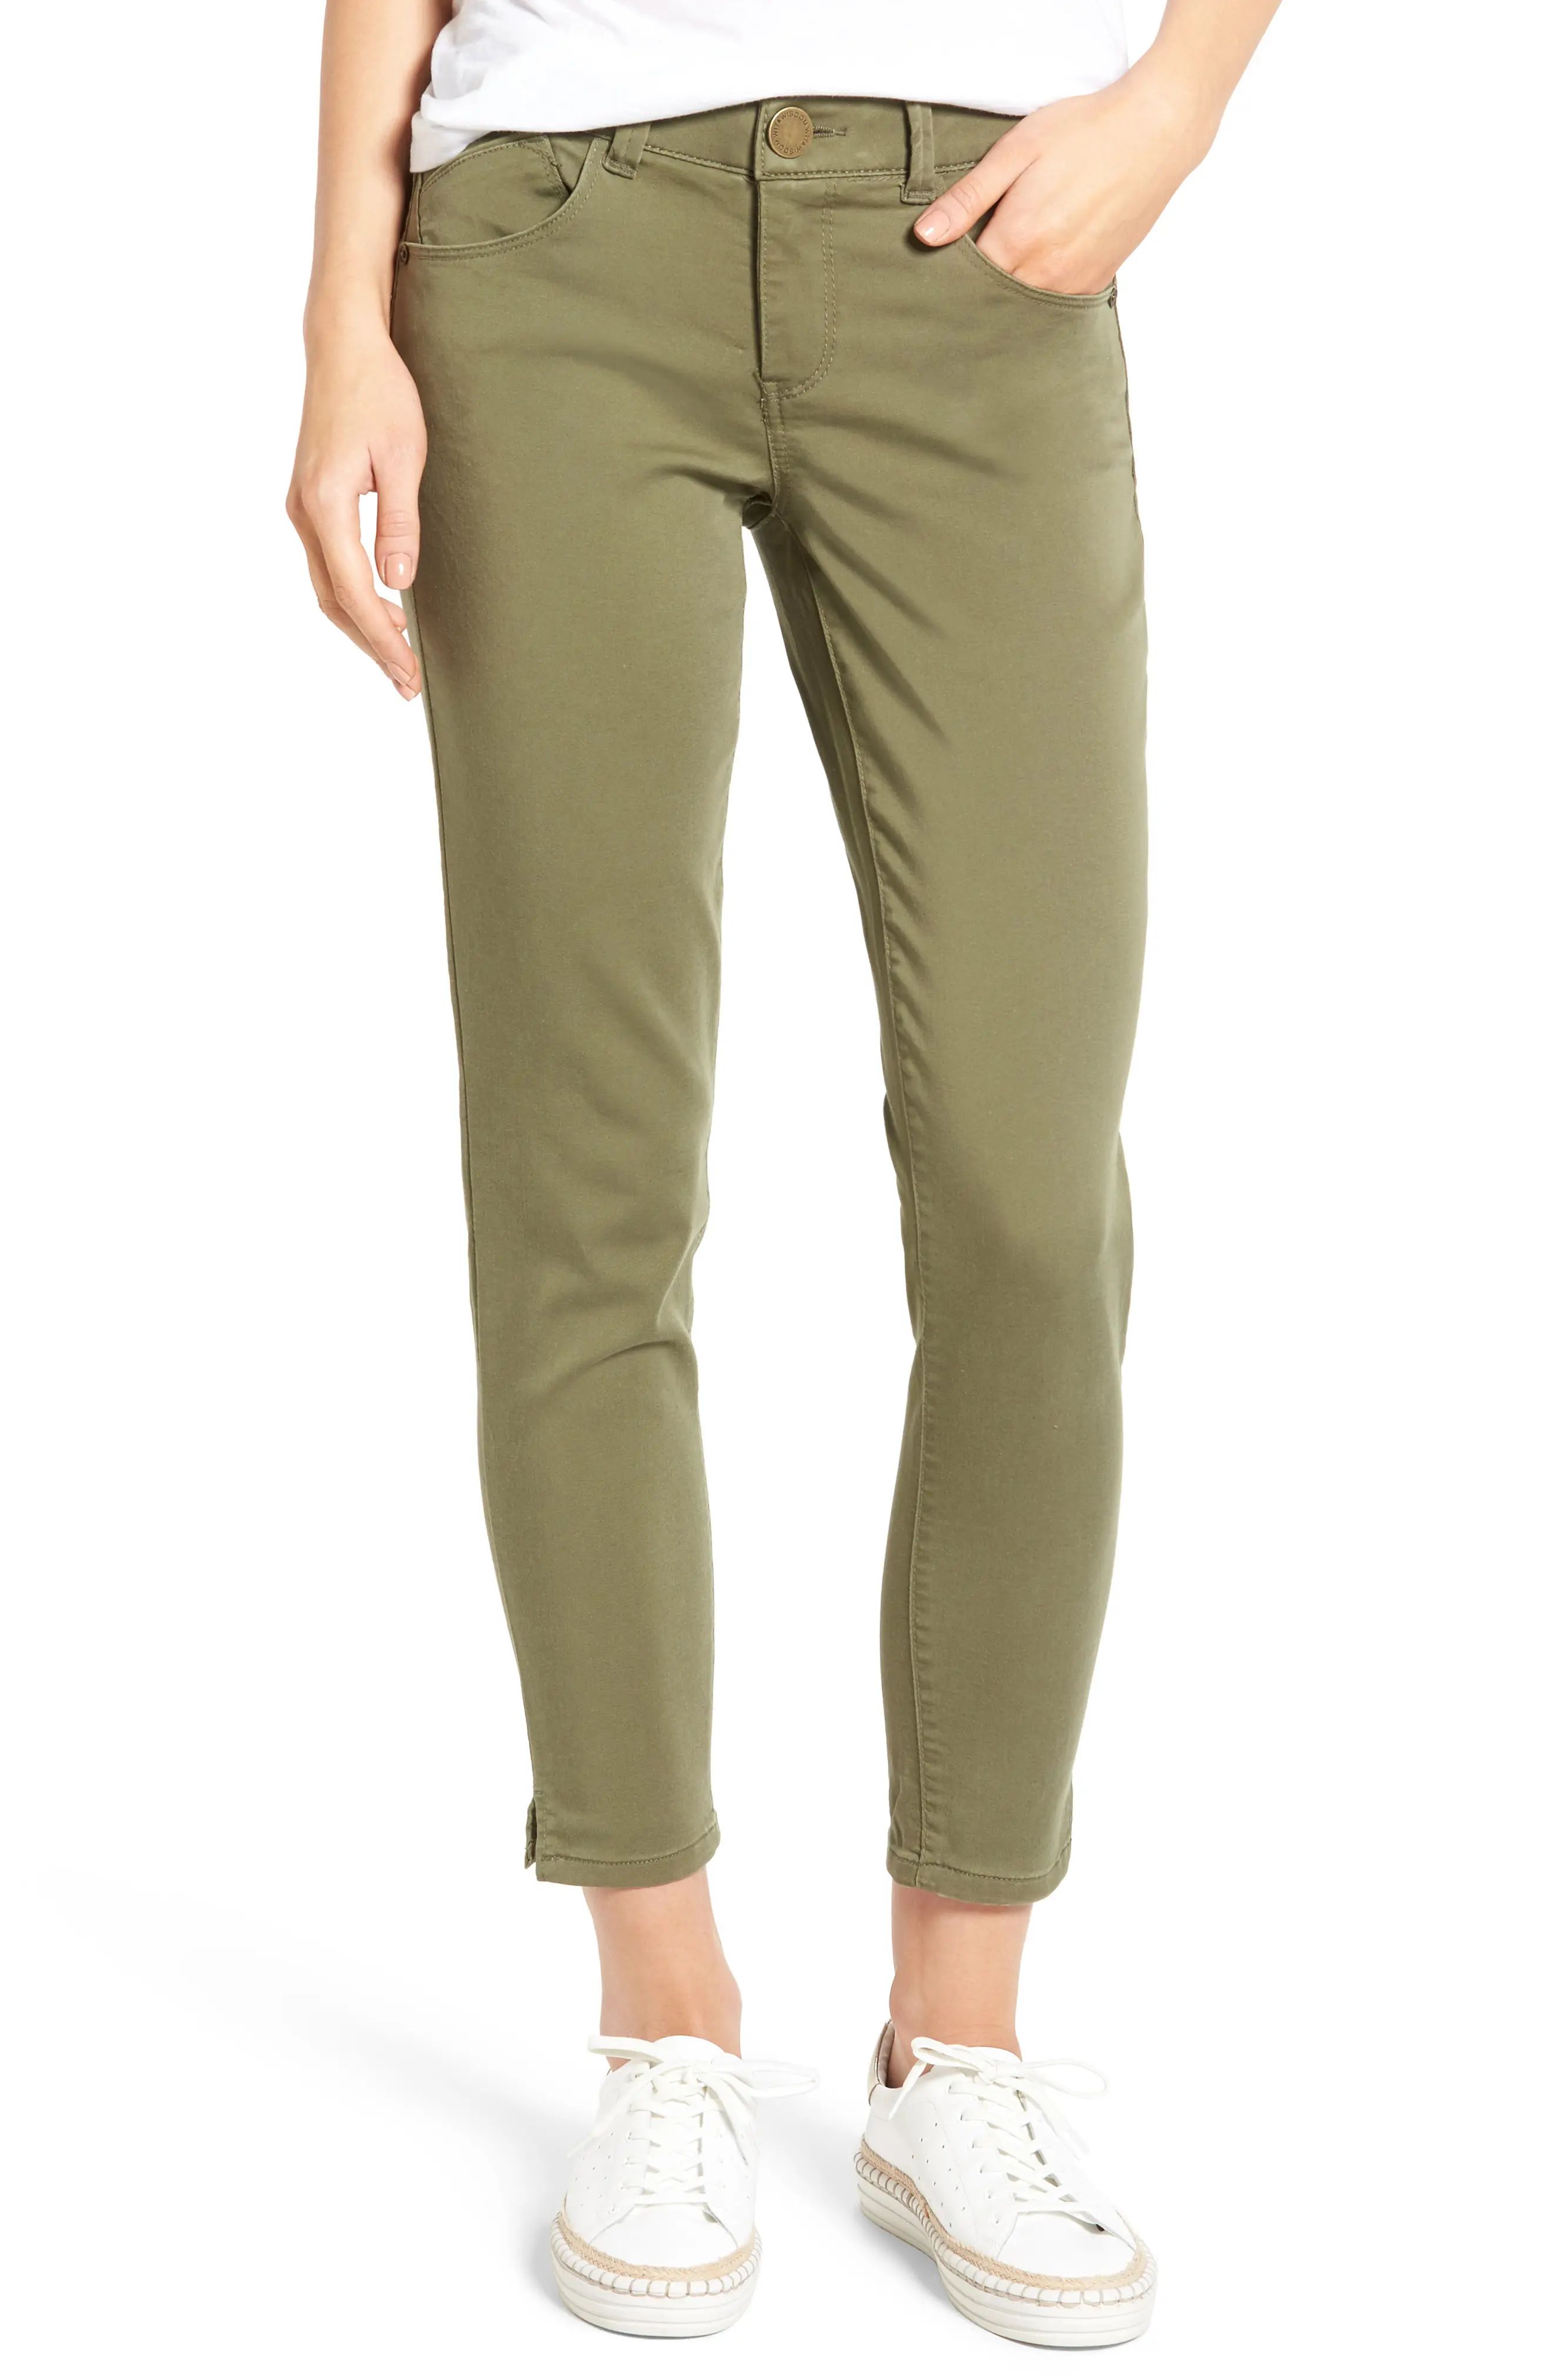 Ab-solution Stretch Twill Skinny Pants | Nordstrom